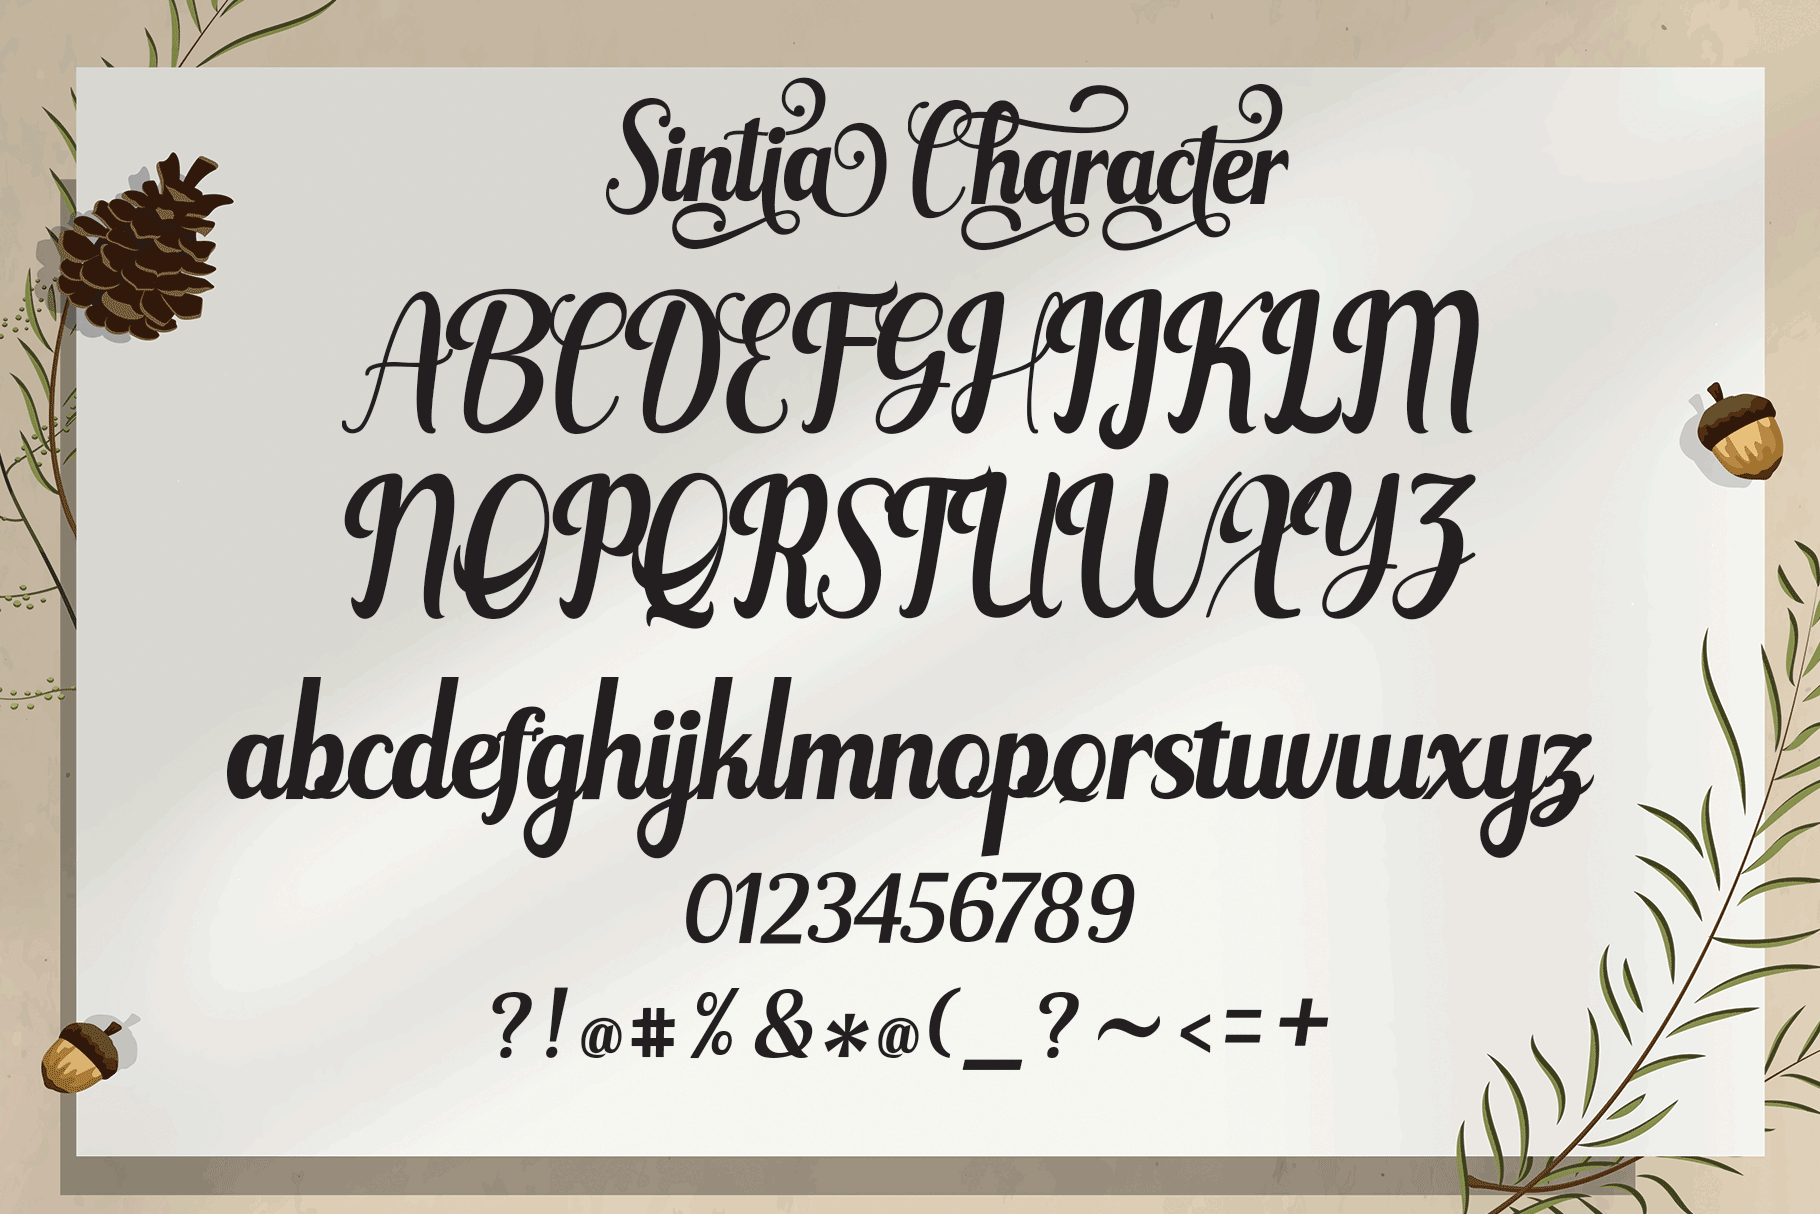 OpenType features with alternative styles, ligatures, and multiple language support.